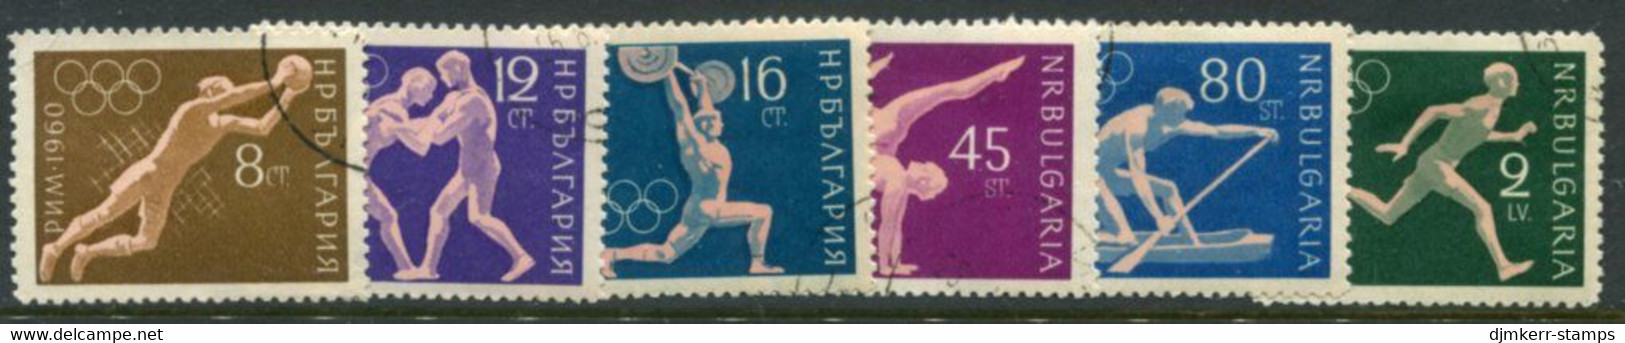 BULGARIA 1960 Olympic Games Perforated Used.  Michel 1172-77 - Gebraucht